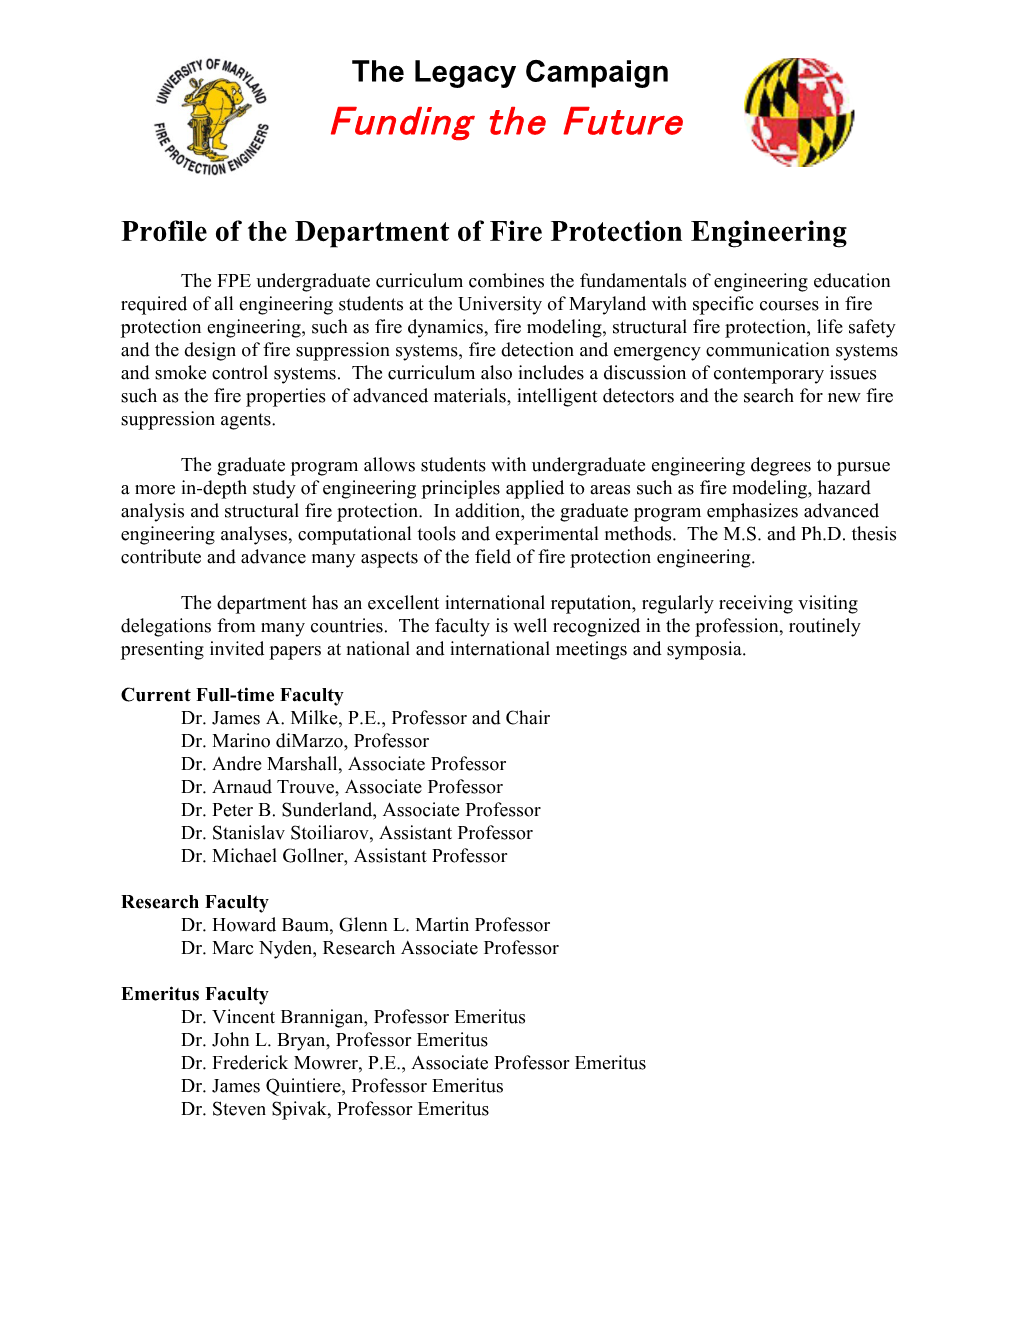 Profile of the Department of Fire Protection Engineering